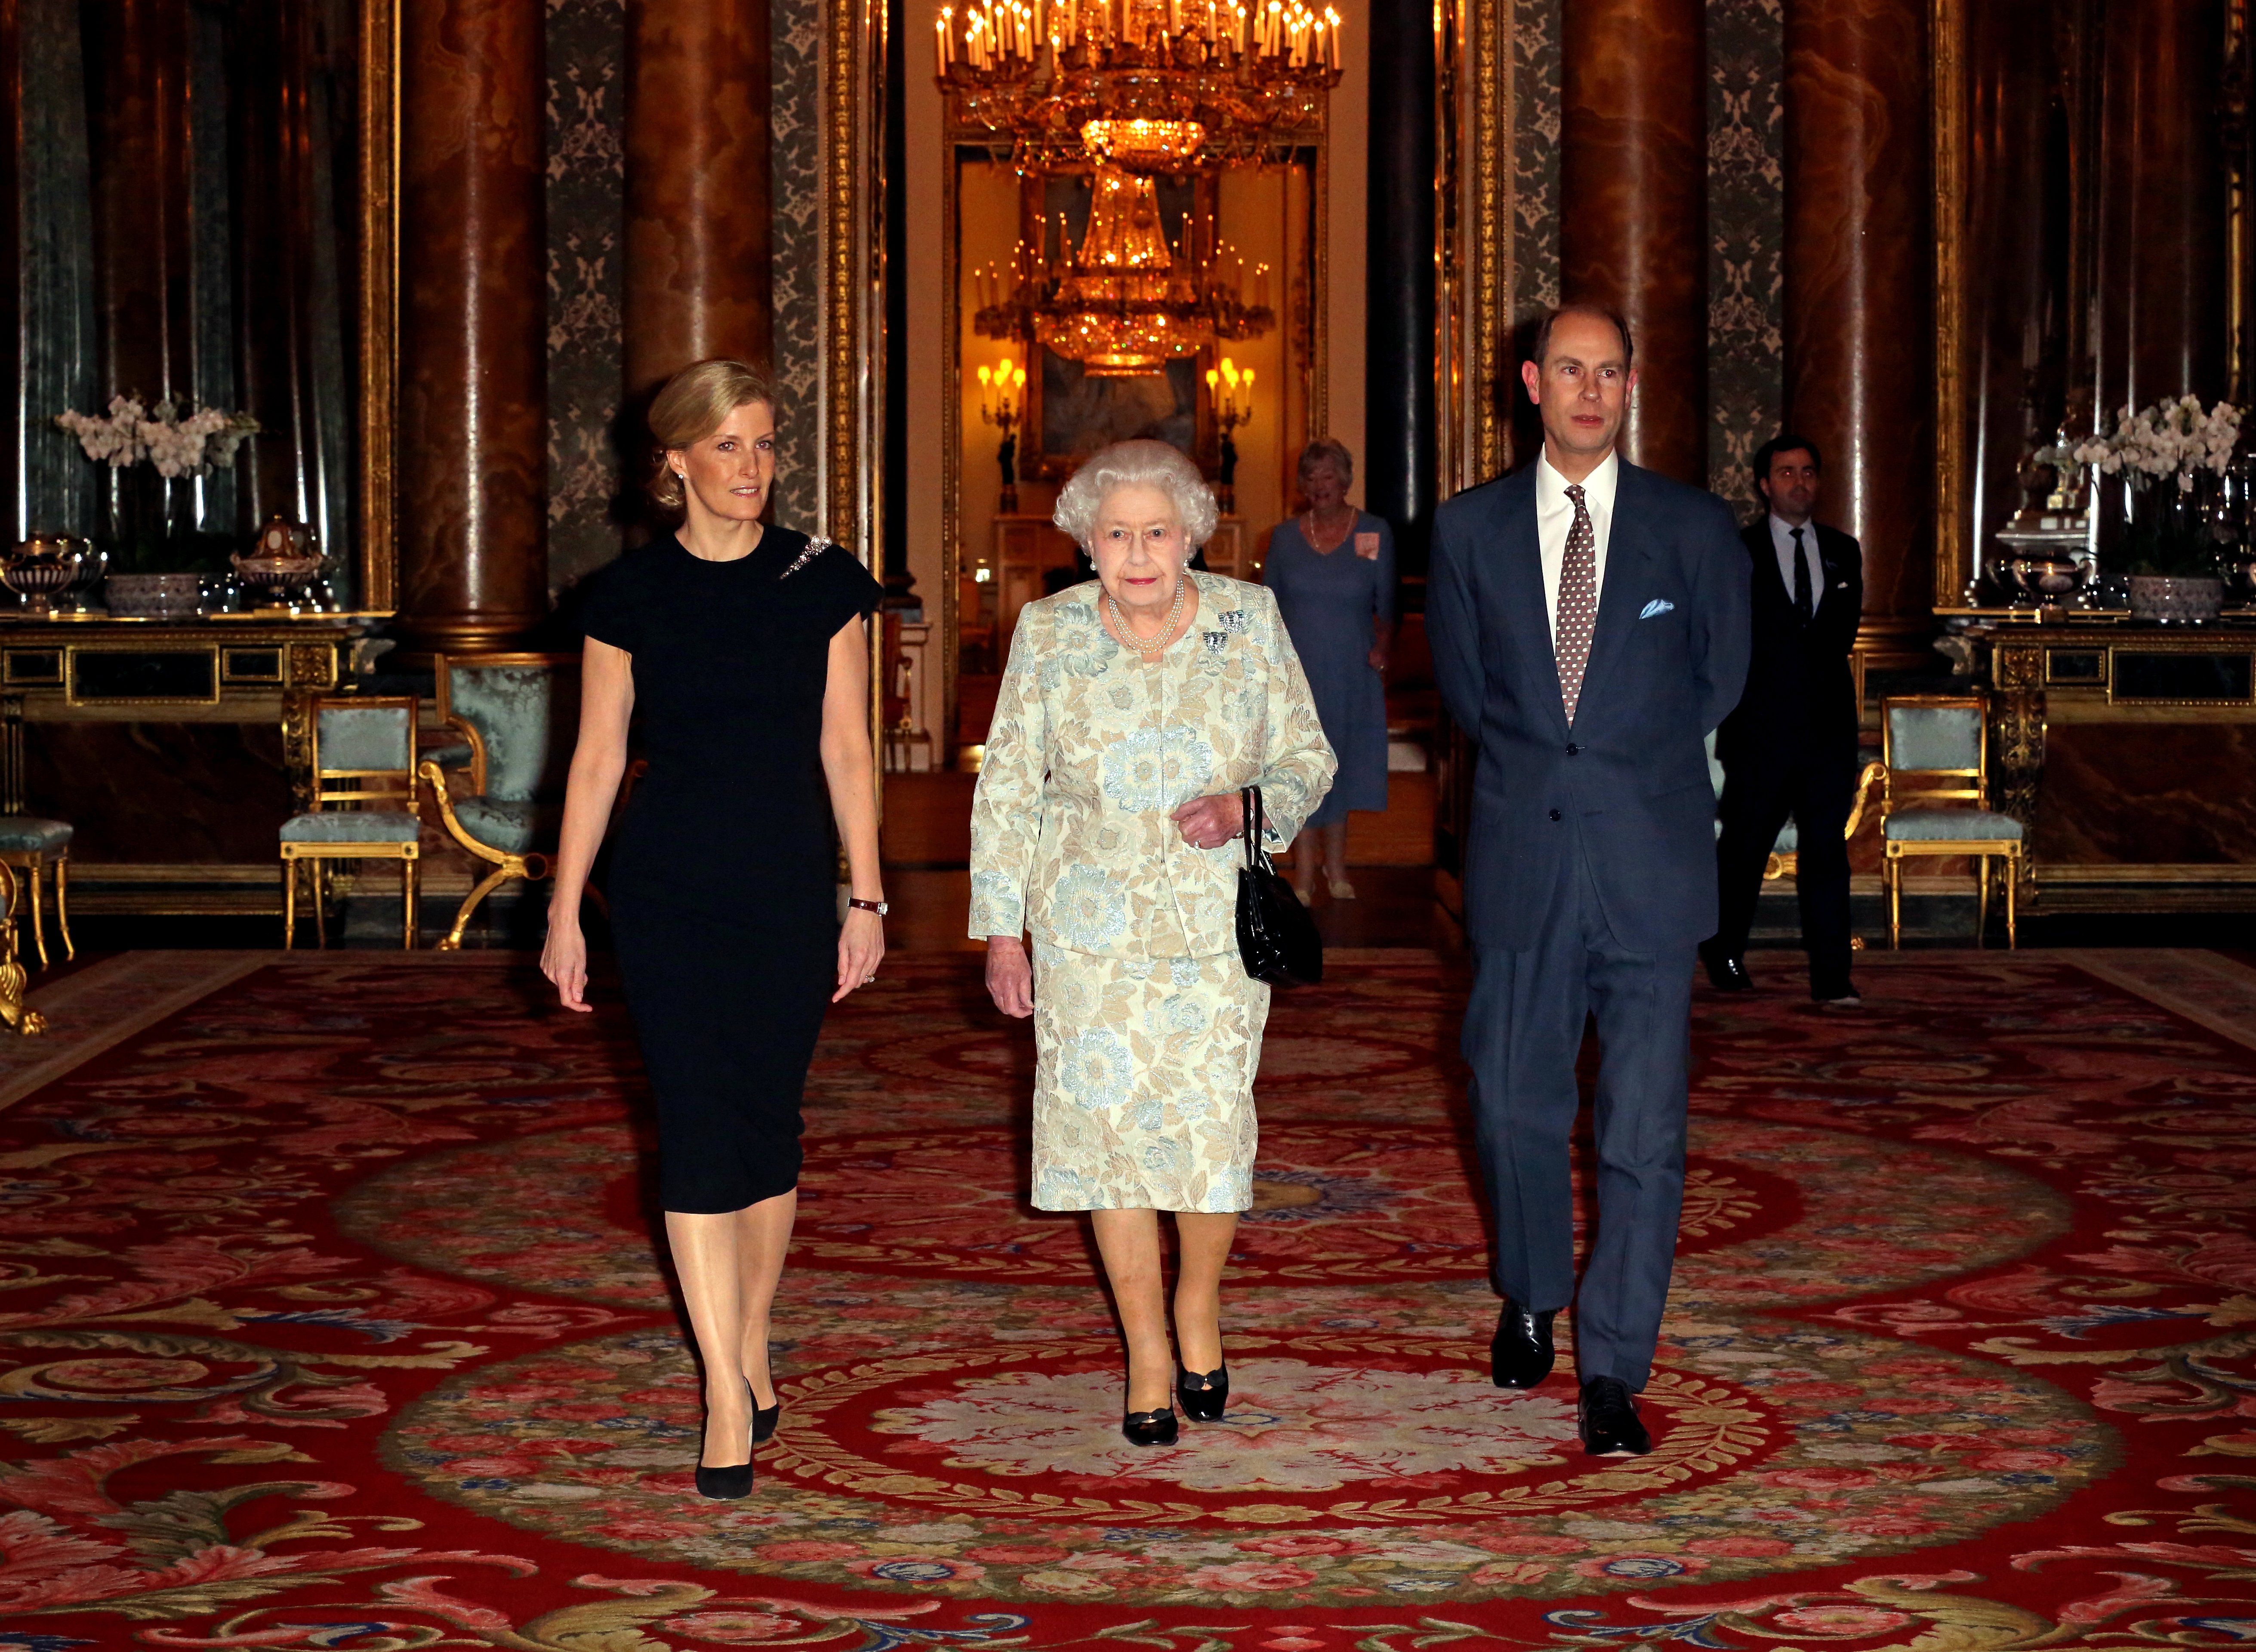 Queen Elizabeth II (R) with Sophie, Countess of Wessex (L) and Prince Edward, Earl of Wessex during her reception to celebrate the patronages & affiliations of the Earl and Countess of Wessex at Buckingham Palace on February 10, 2015 in London, England | Source: Getty Images 